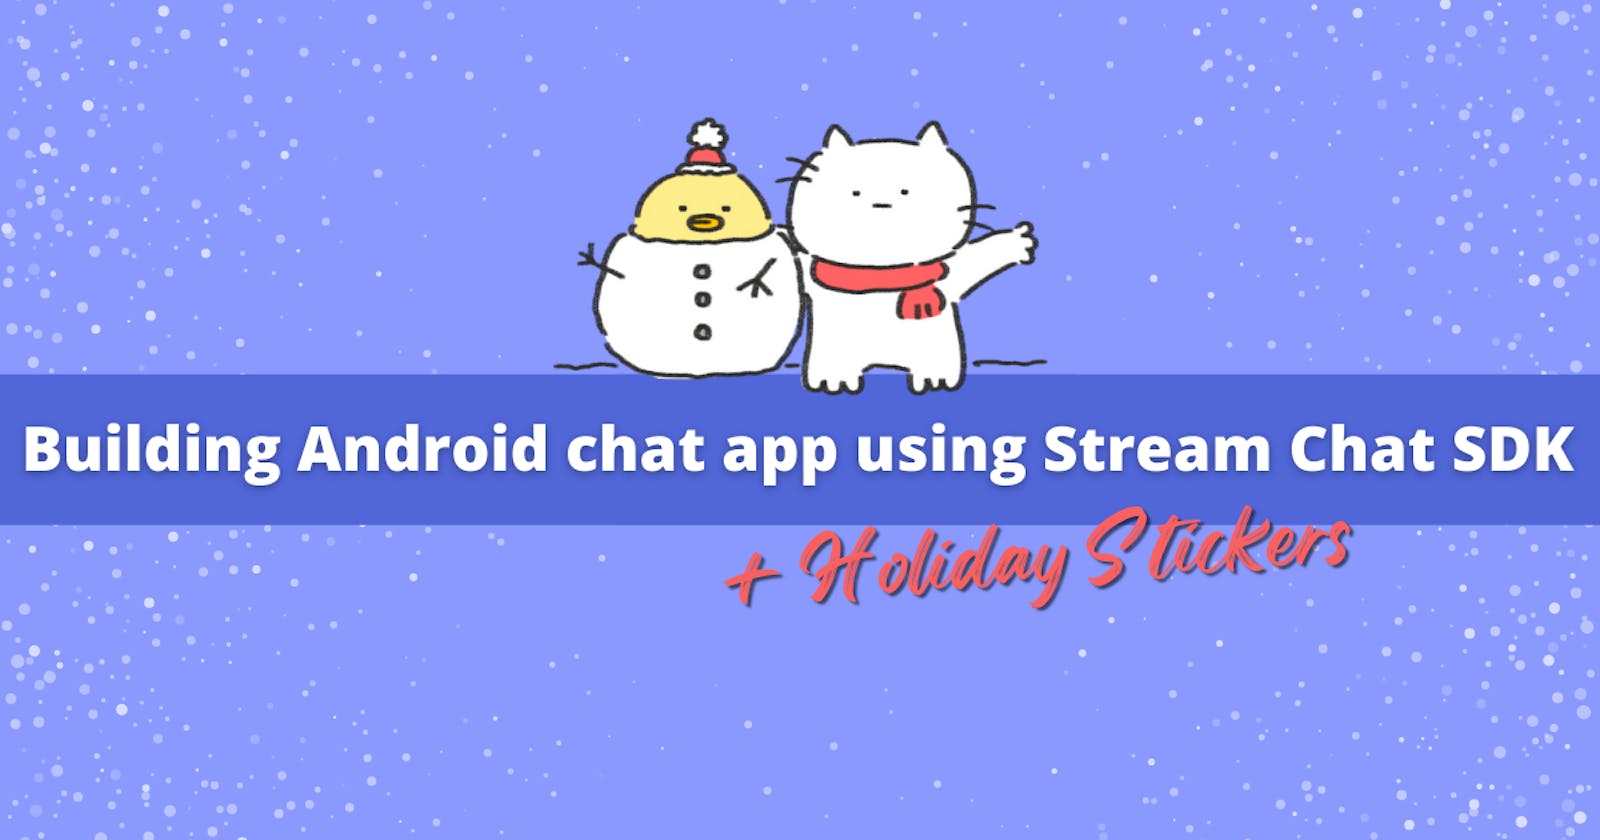 Building Android chat app using Stream Chat SDK + holiday stickers